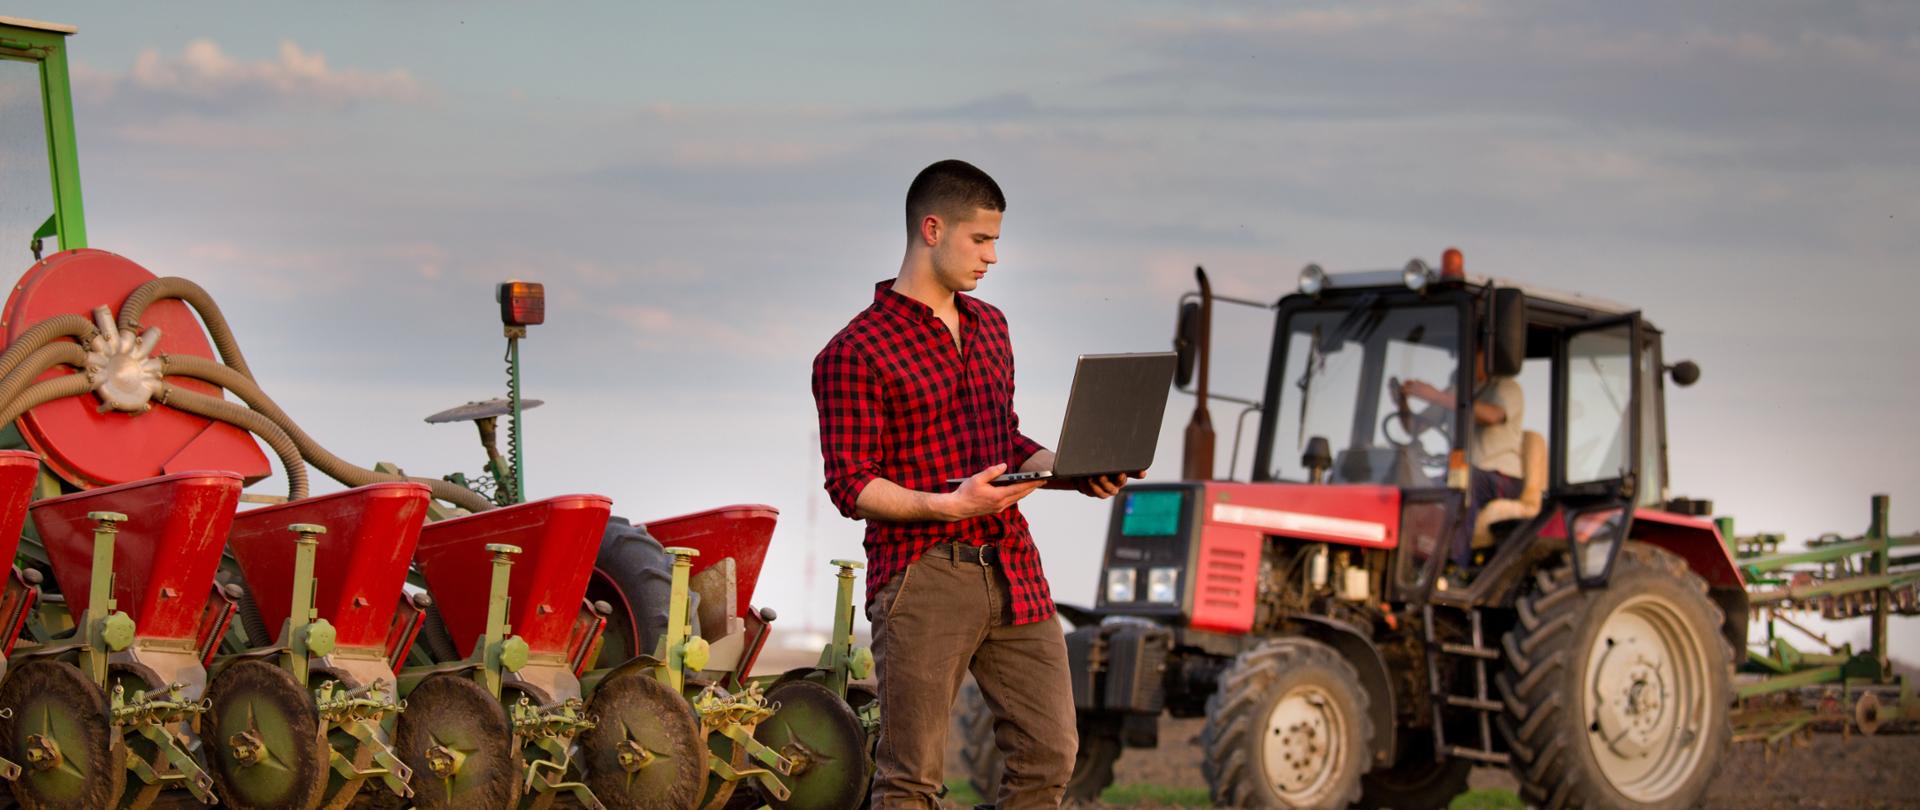 Young farmer with laptop standing in field in front of tractor with smart sowing equipment